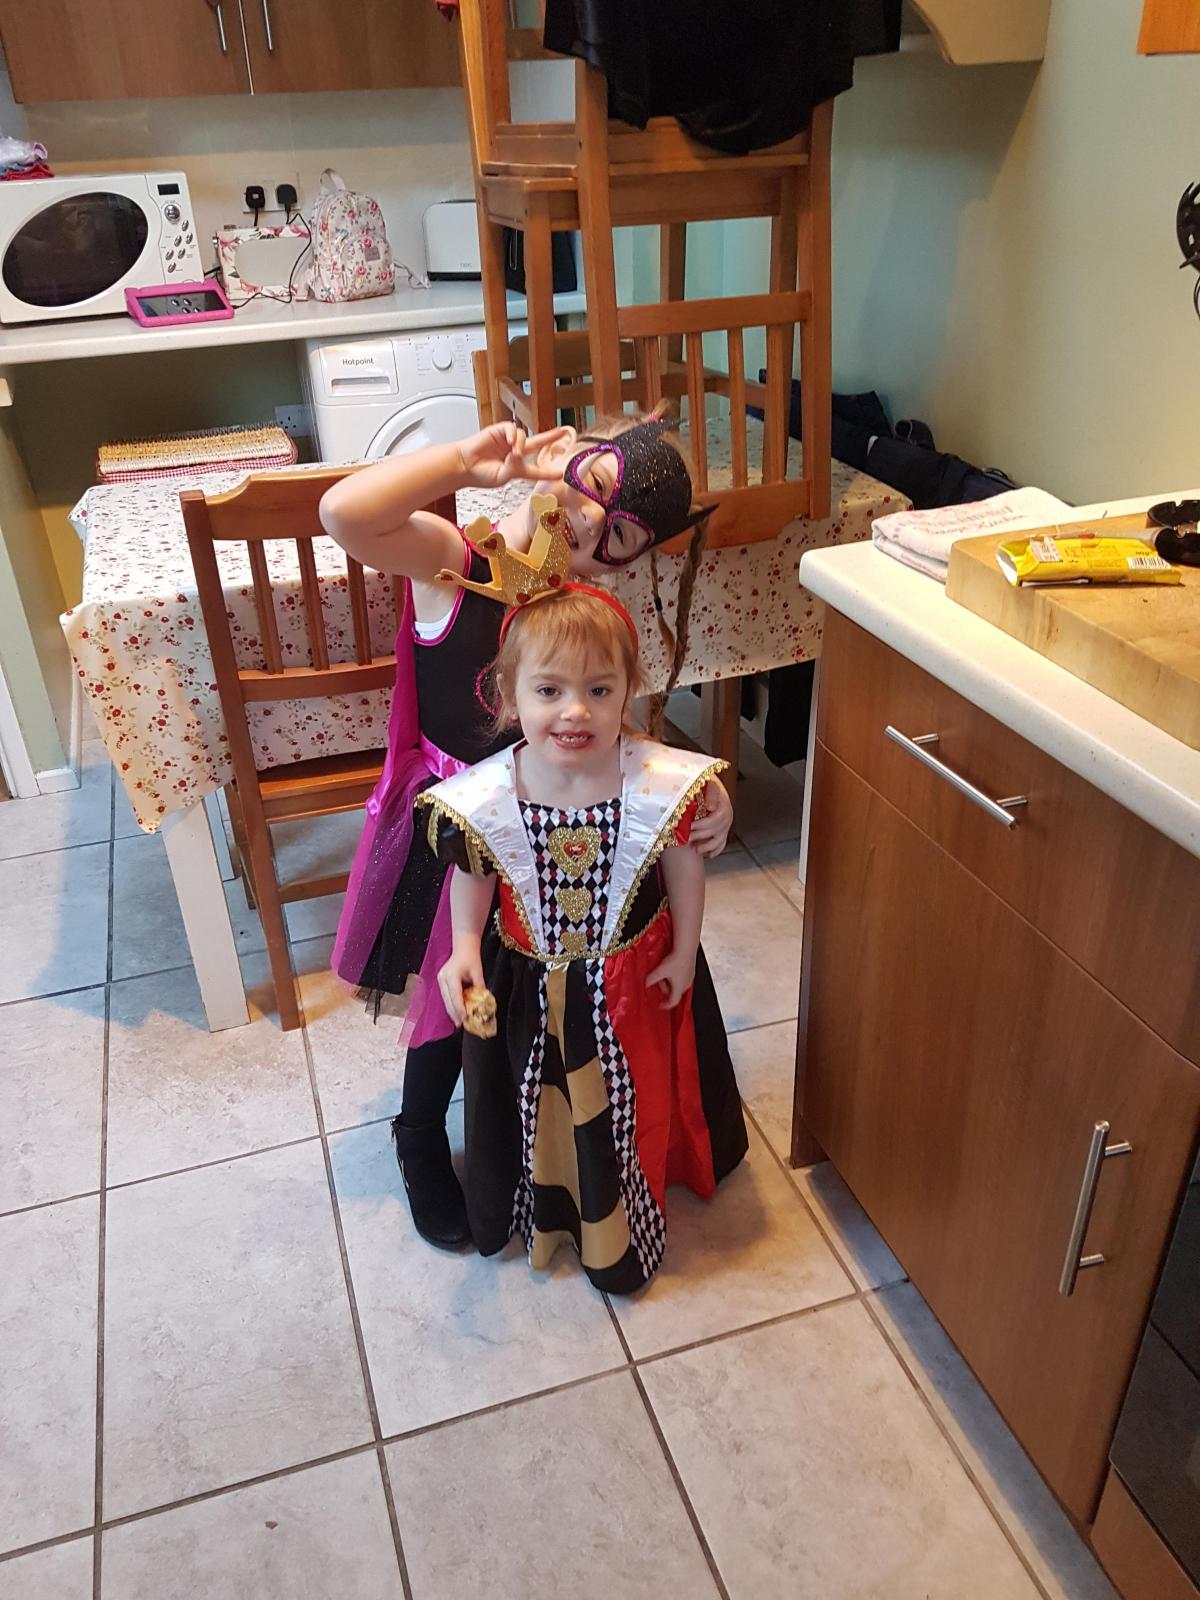 Eva Mae Woodall, 4, as Bat Girl, and Annaya Upton, 2, as the Queen of Hearts. Both from Franche Primary School